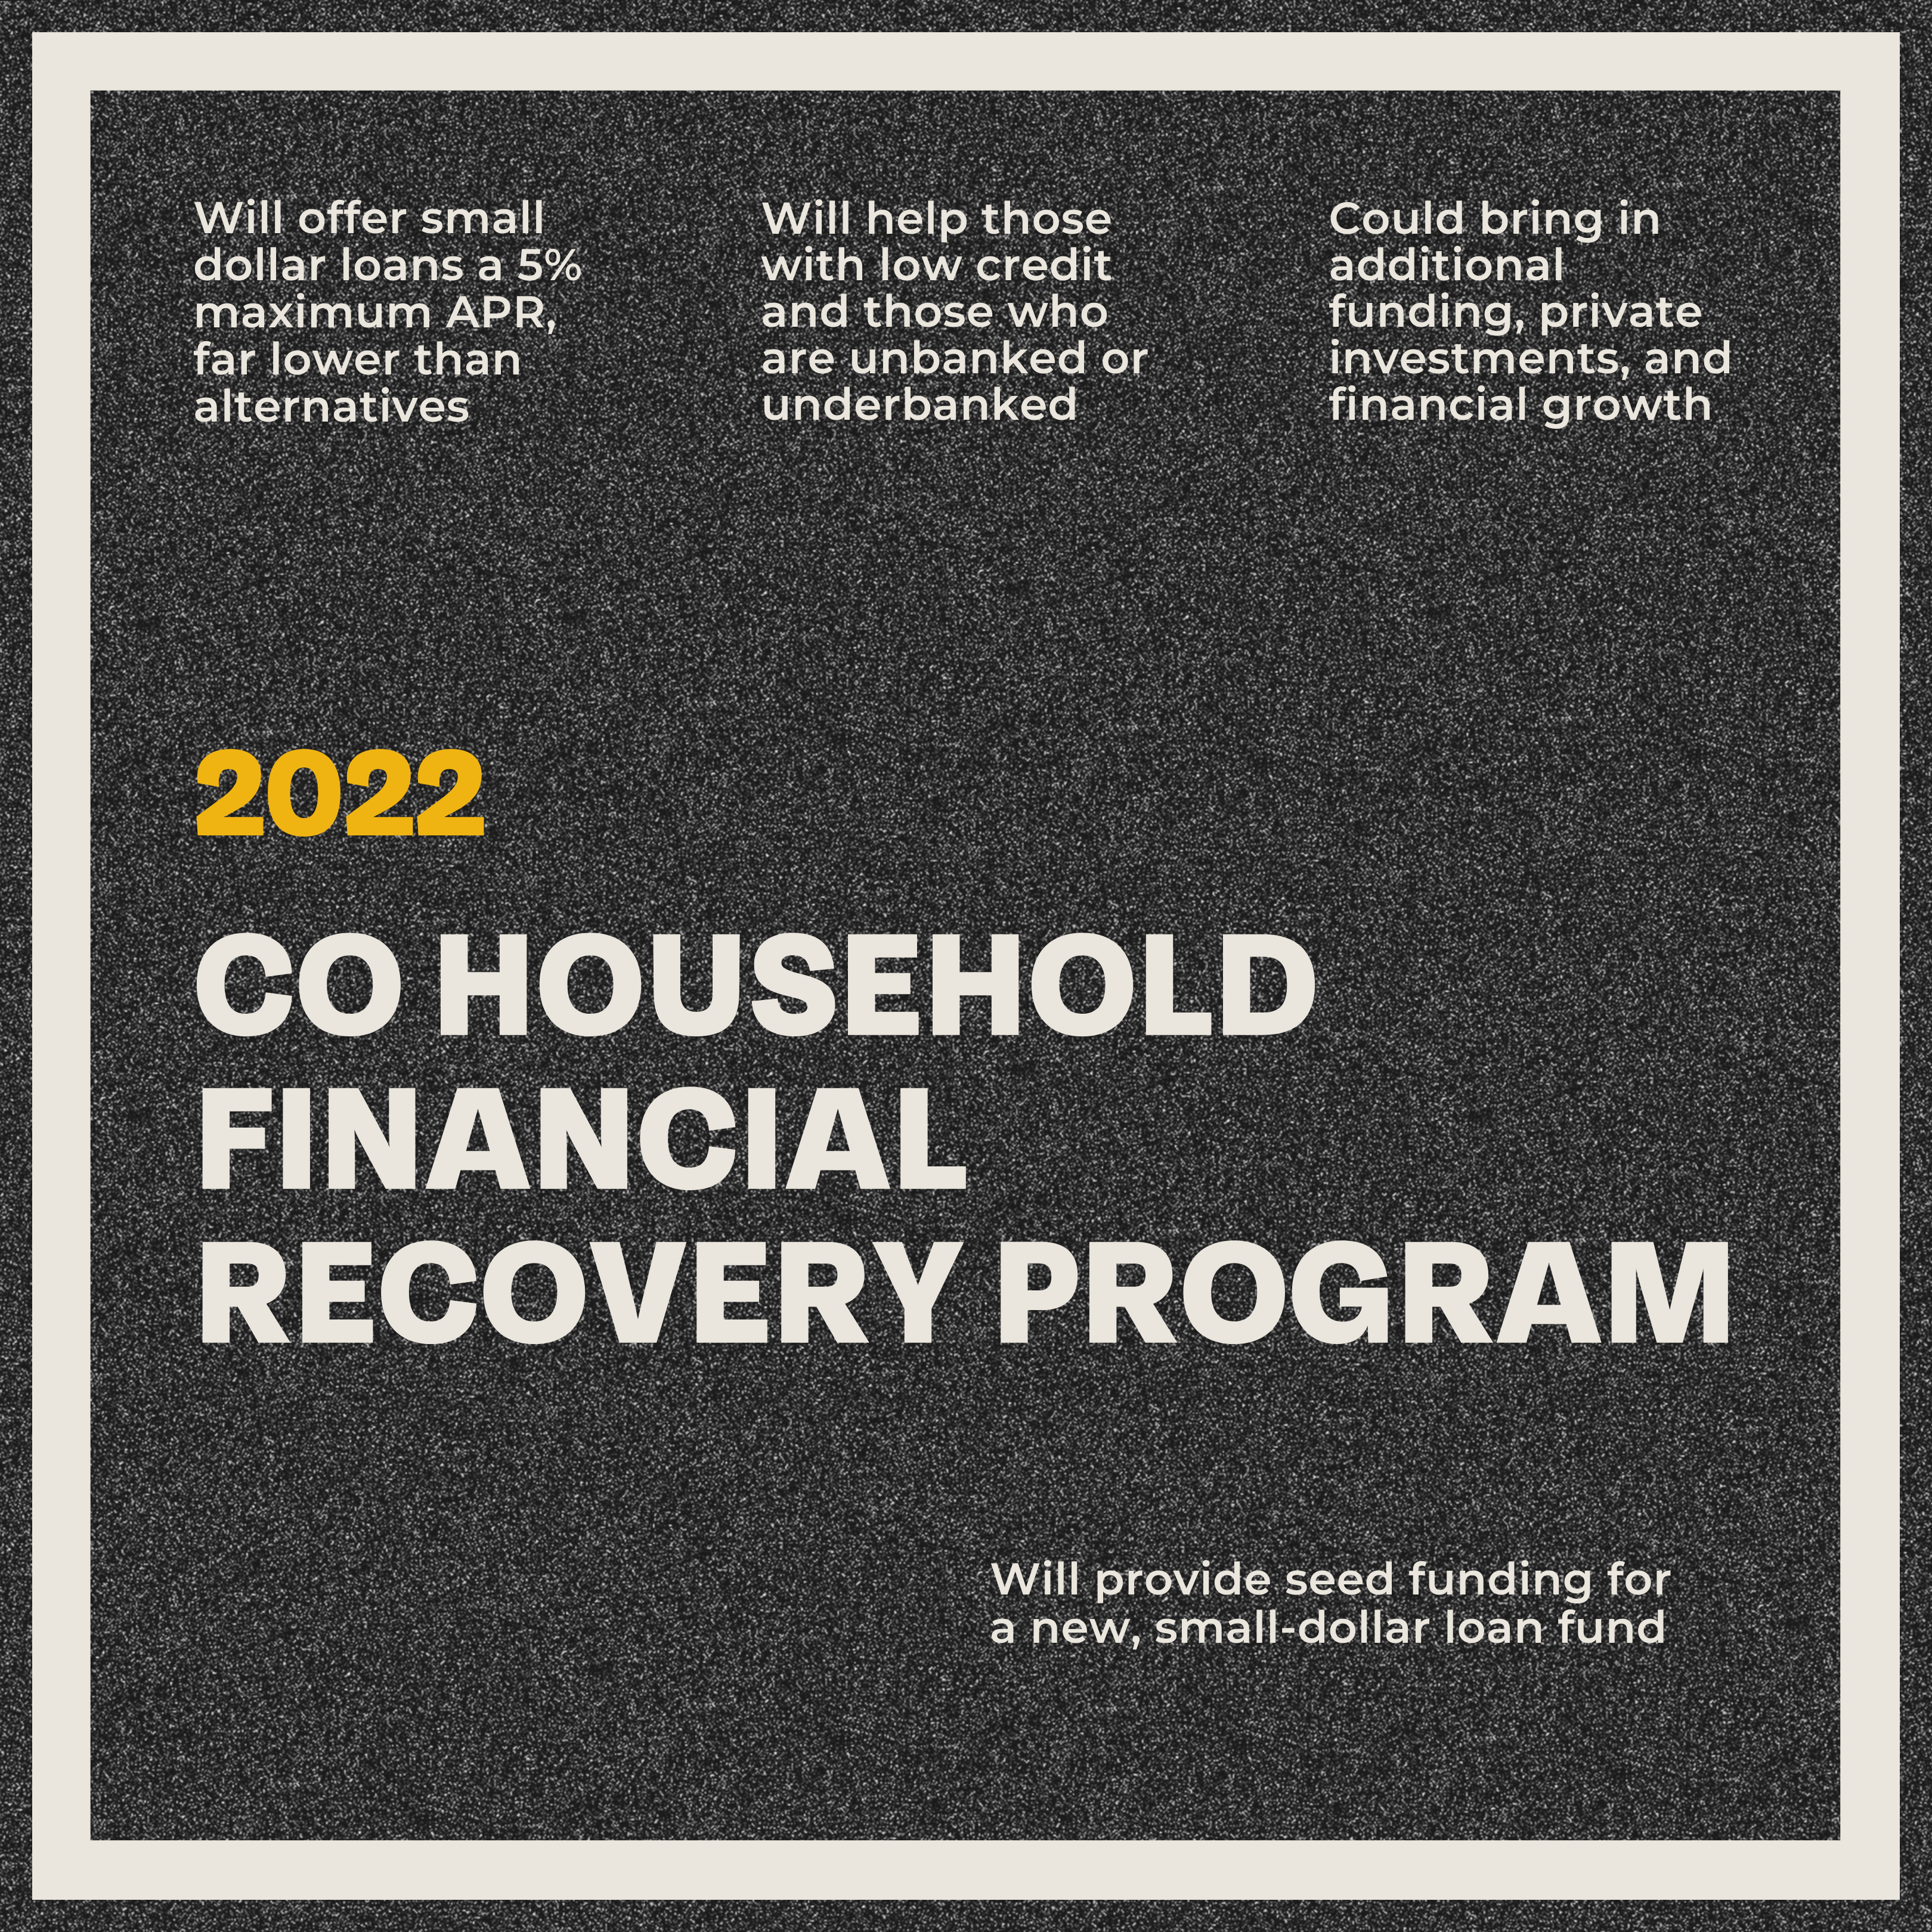 Textual overview of the 2022 colorado household financial recovery program highlighting its key initiatives and funding strategies.